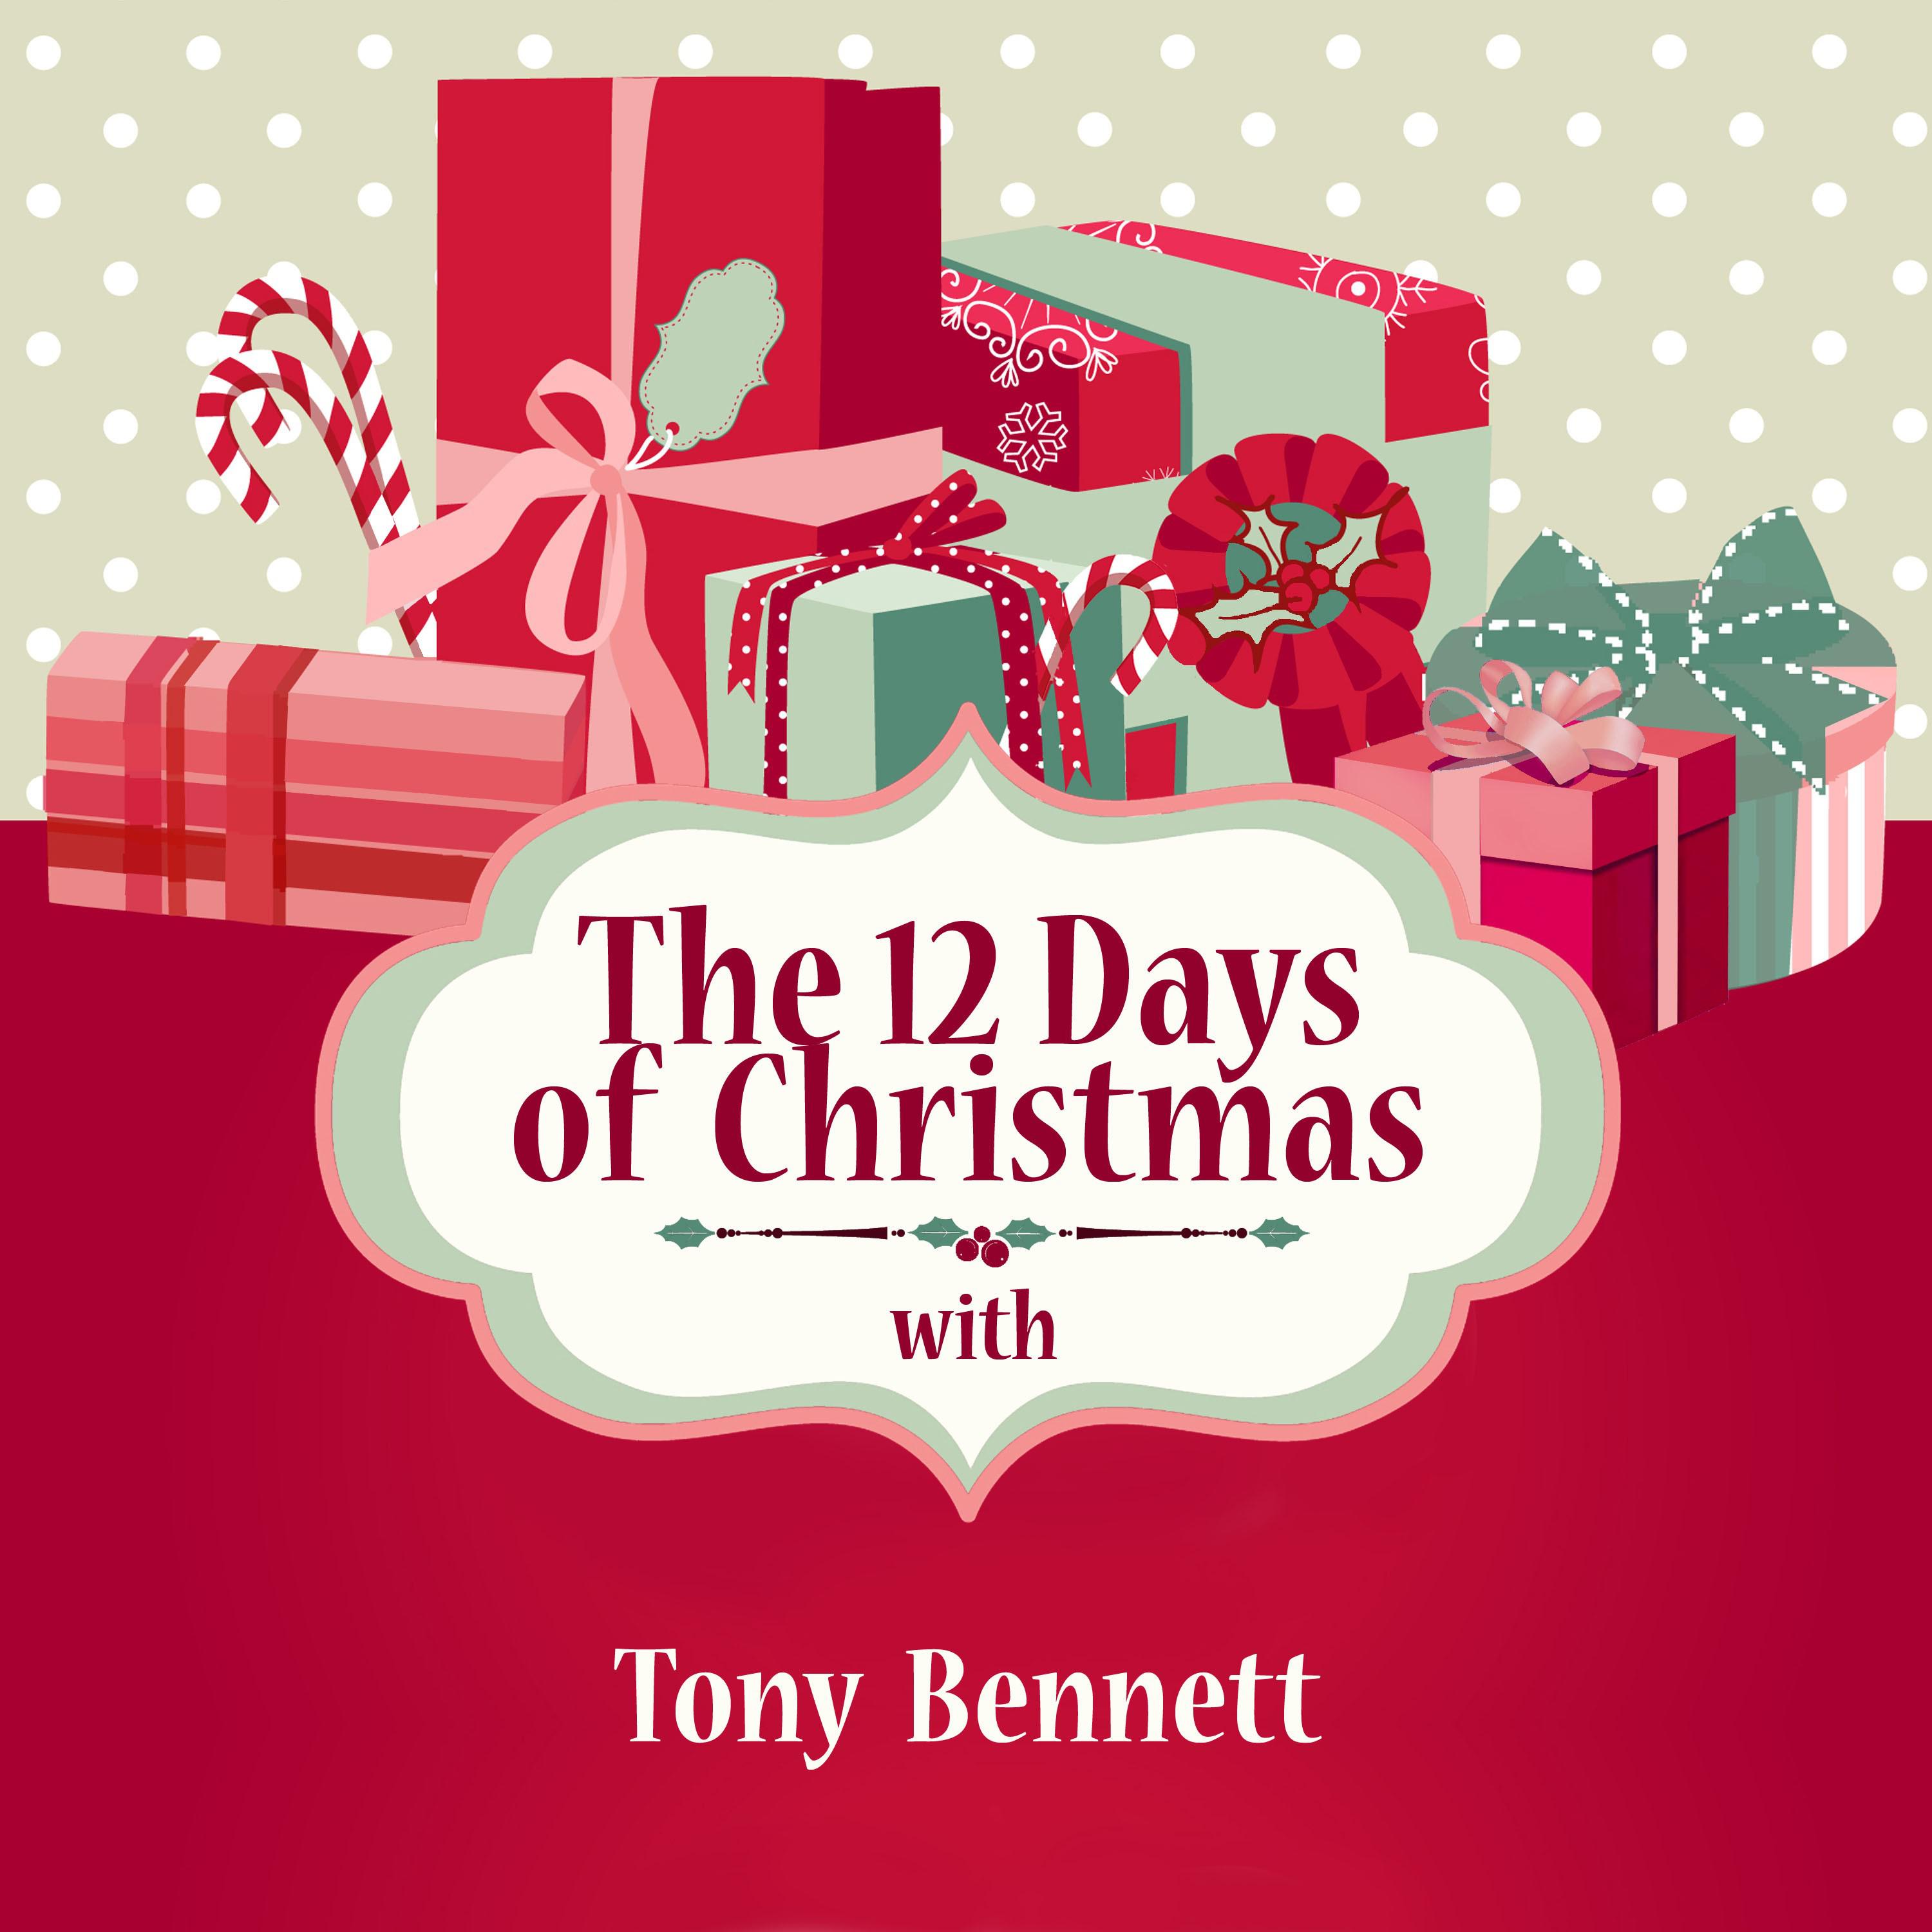 The 12 Days of Christmas with Tony Bennett